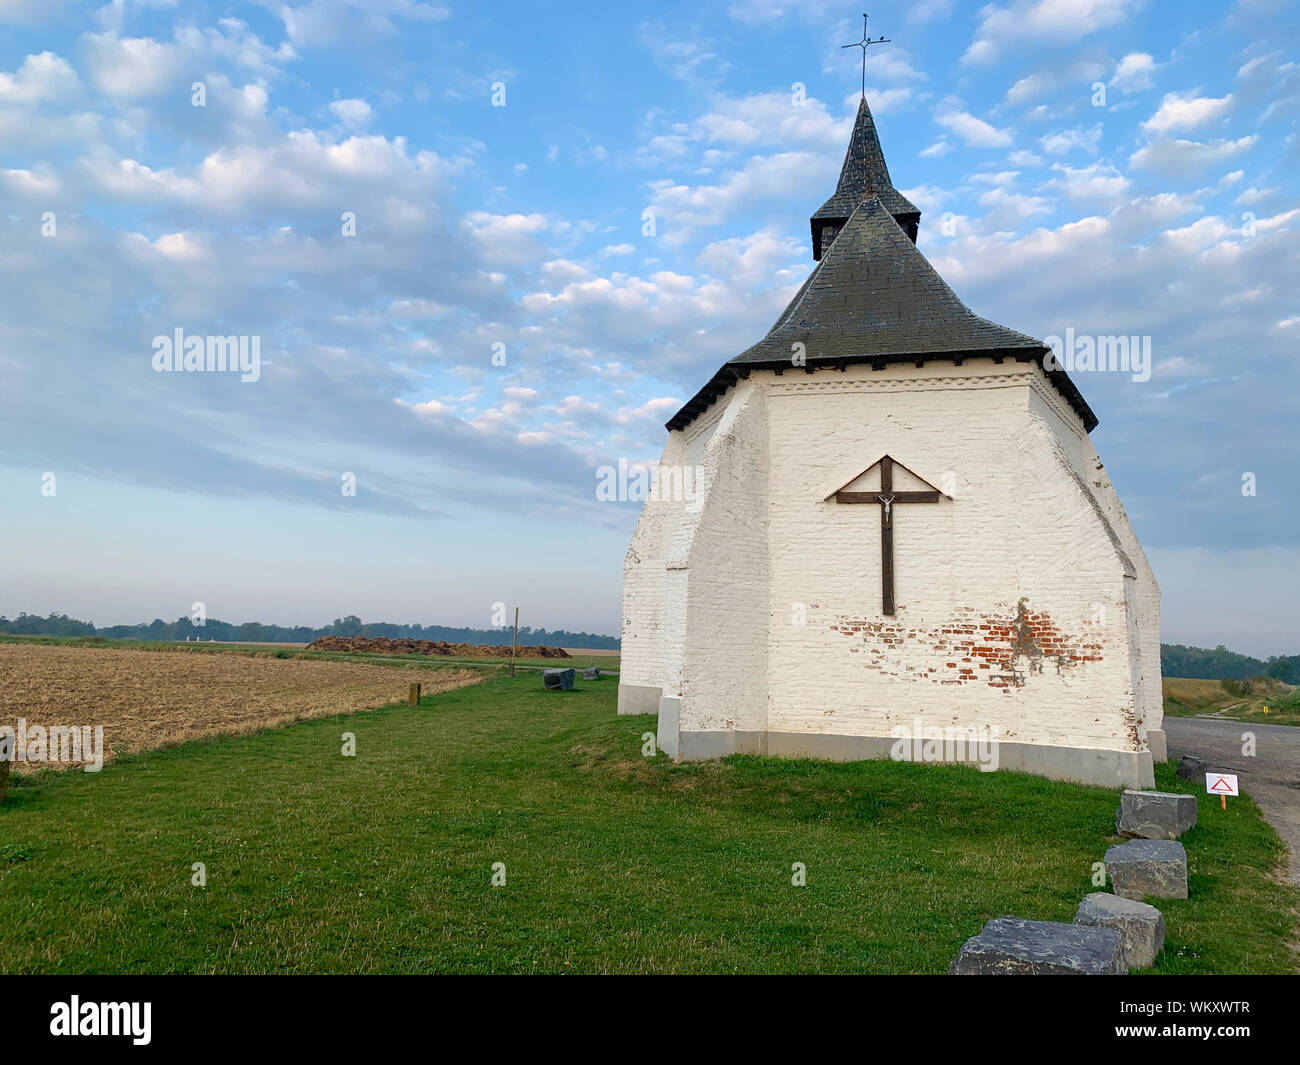 The chapel of Try-au-Chene, also called chapel of Notre-Dame de Hault, rural chapel located in Bousval, village on the Belgian town of Genappe. Stock Photo